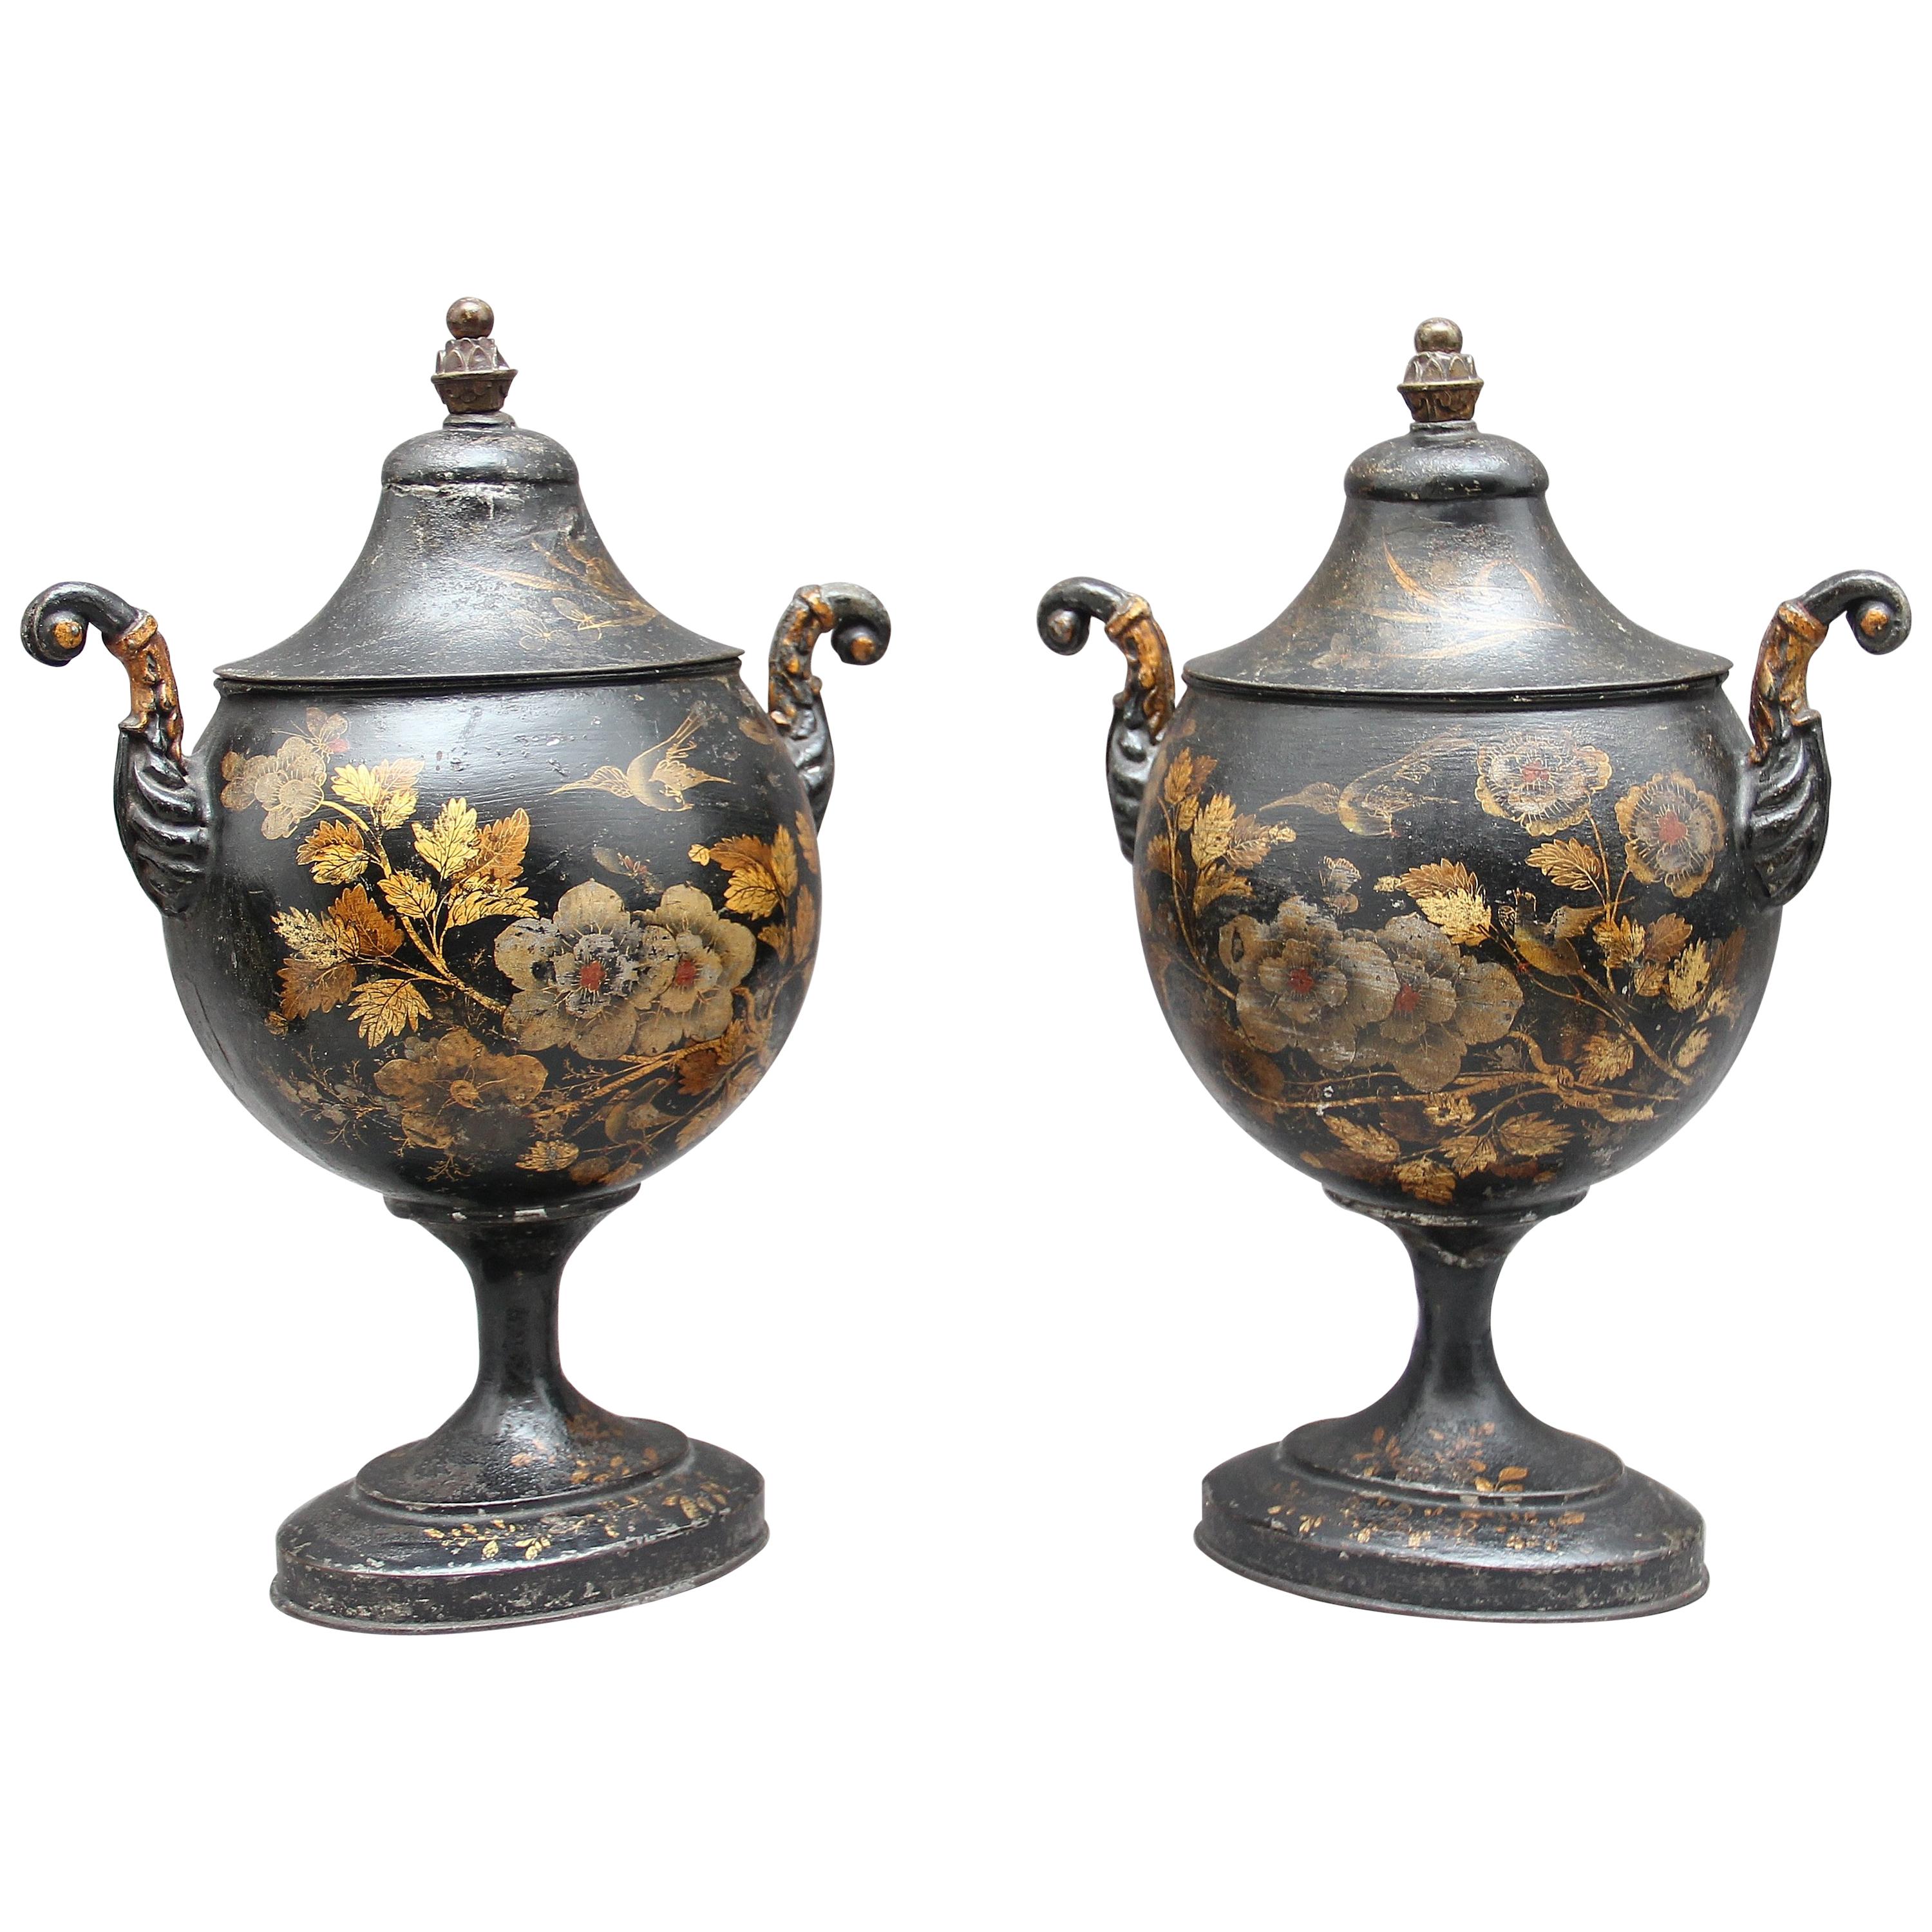 Pair of Early 19th Century Tole Chestnut Urns